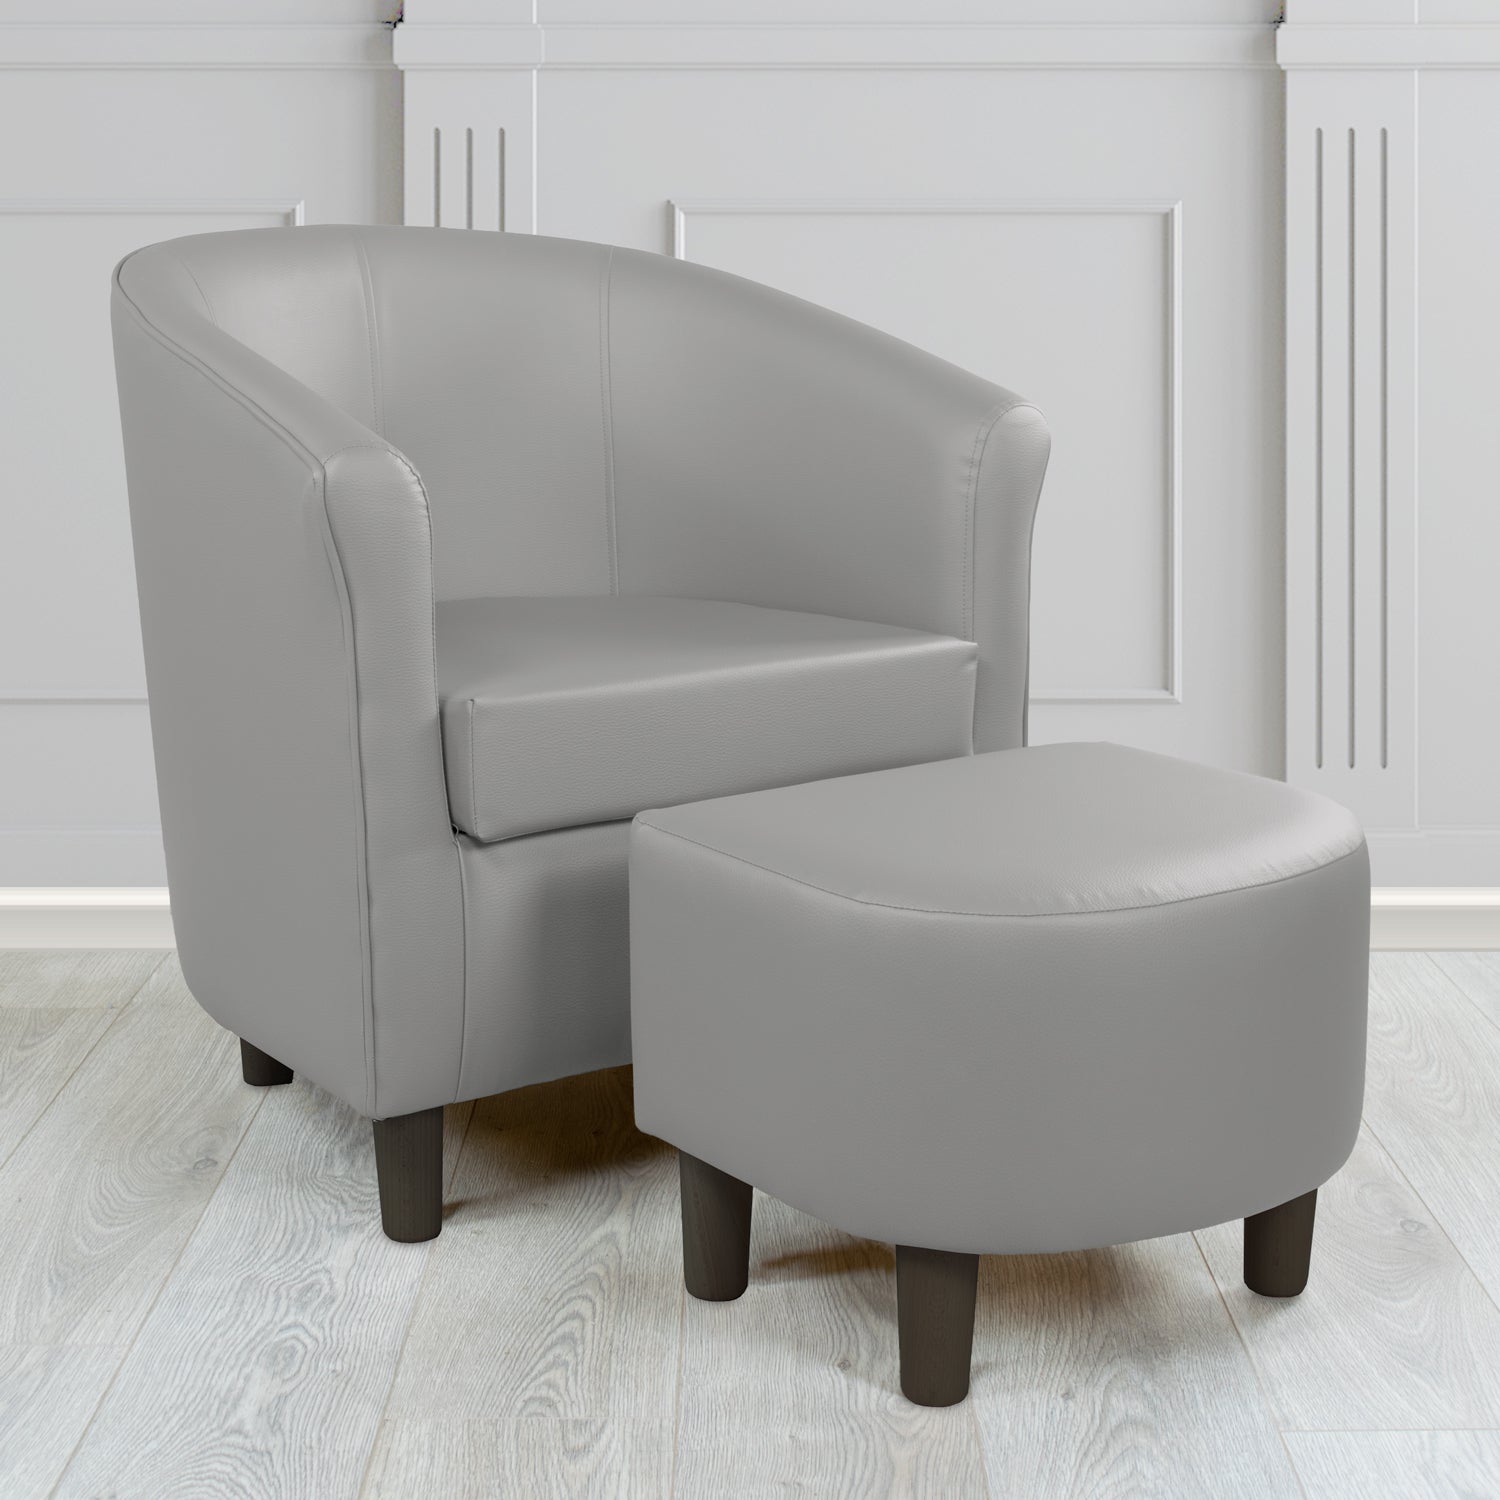 Tuscany Just Colour Koala Faux Leather Tub Chair with Dee Footstool Set - The Tub Chair Shop